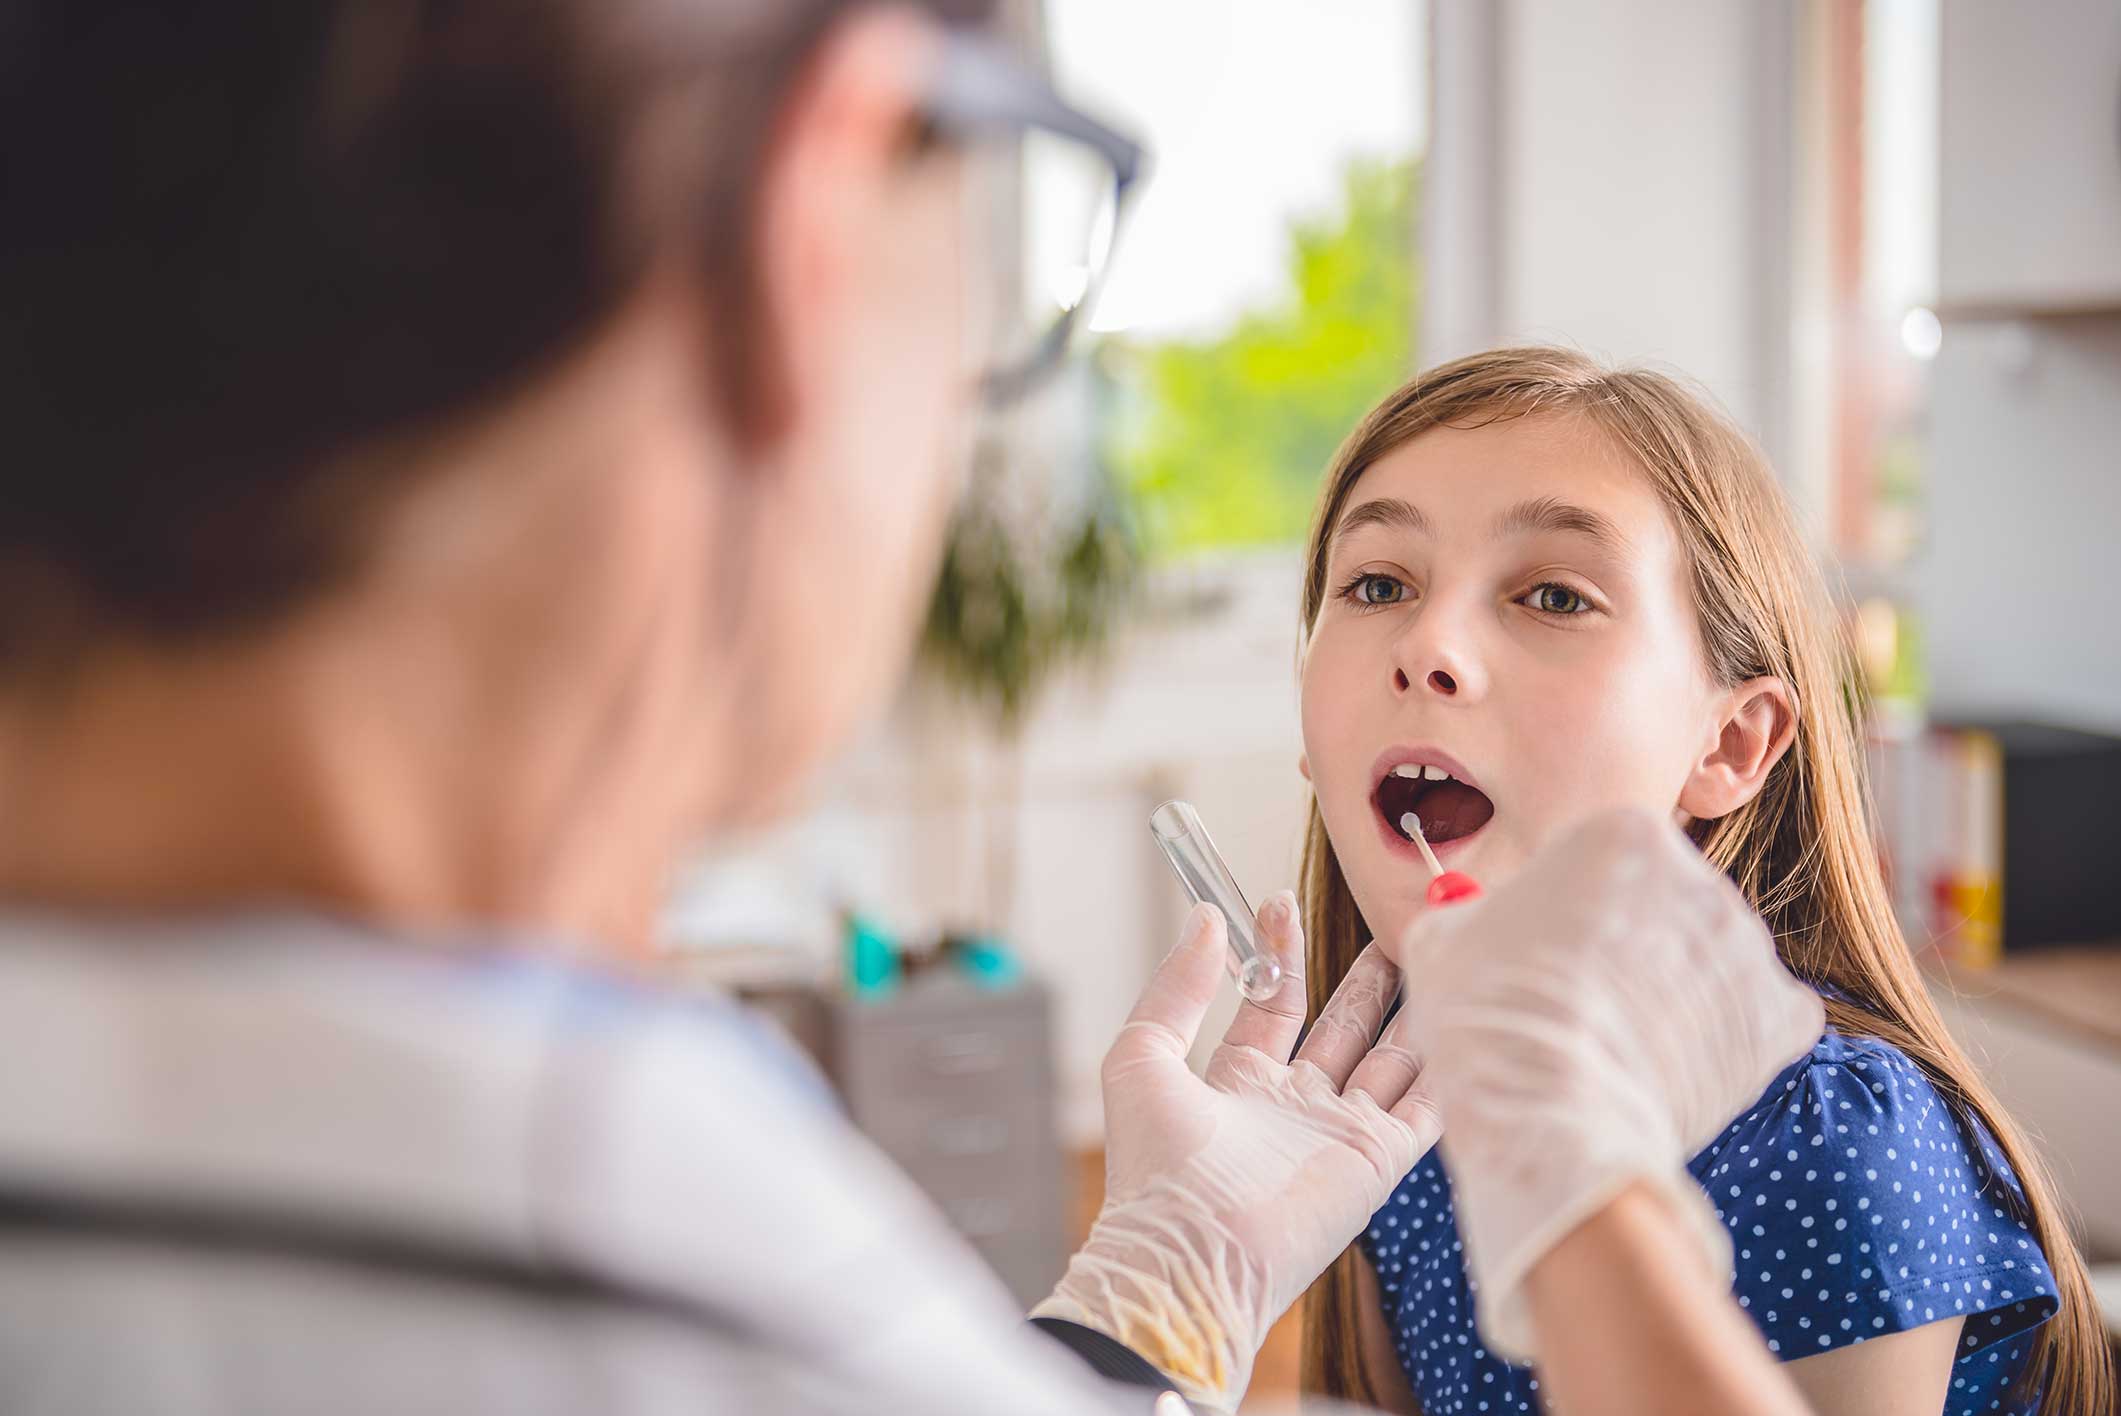 Doctor examining a patient's mouth